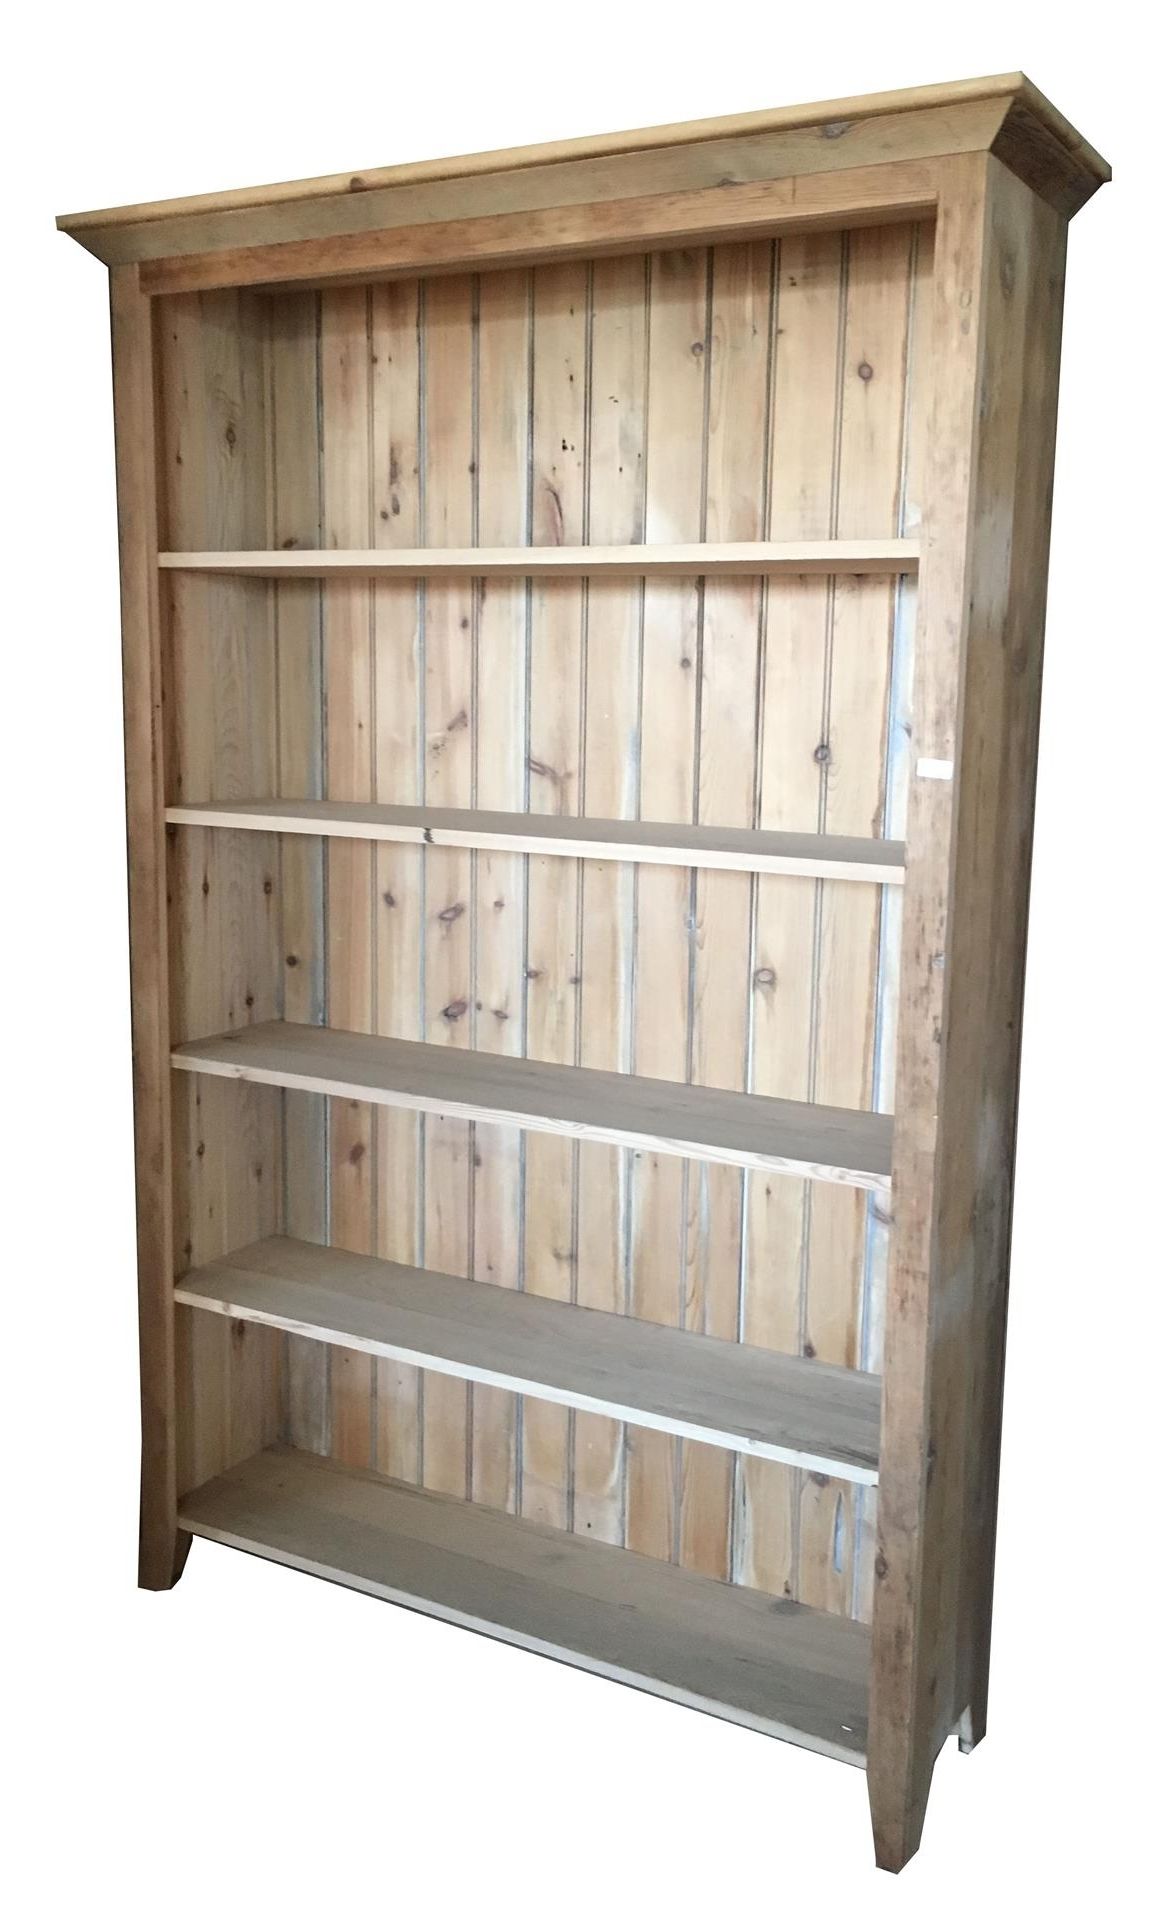 Newest Solid Wood Bookcases Pertaining To Solid Wood Bookcases At Dutchcrafters (View 10 of 15)